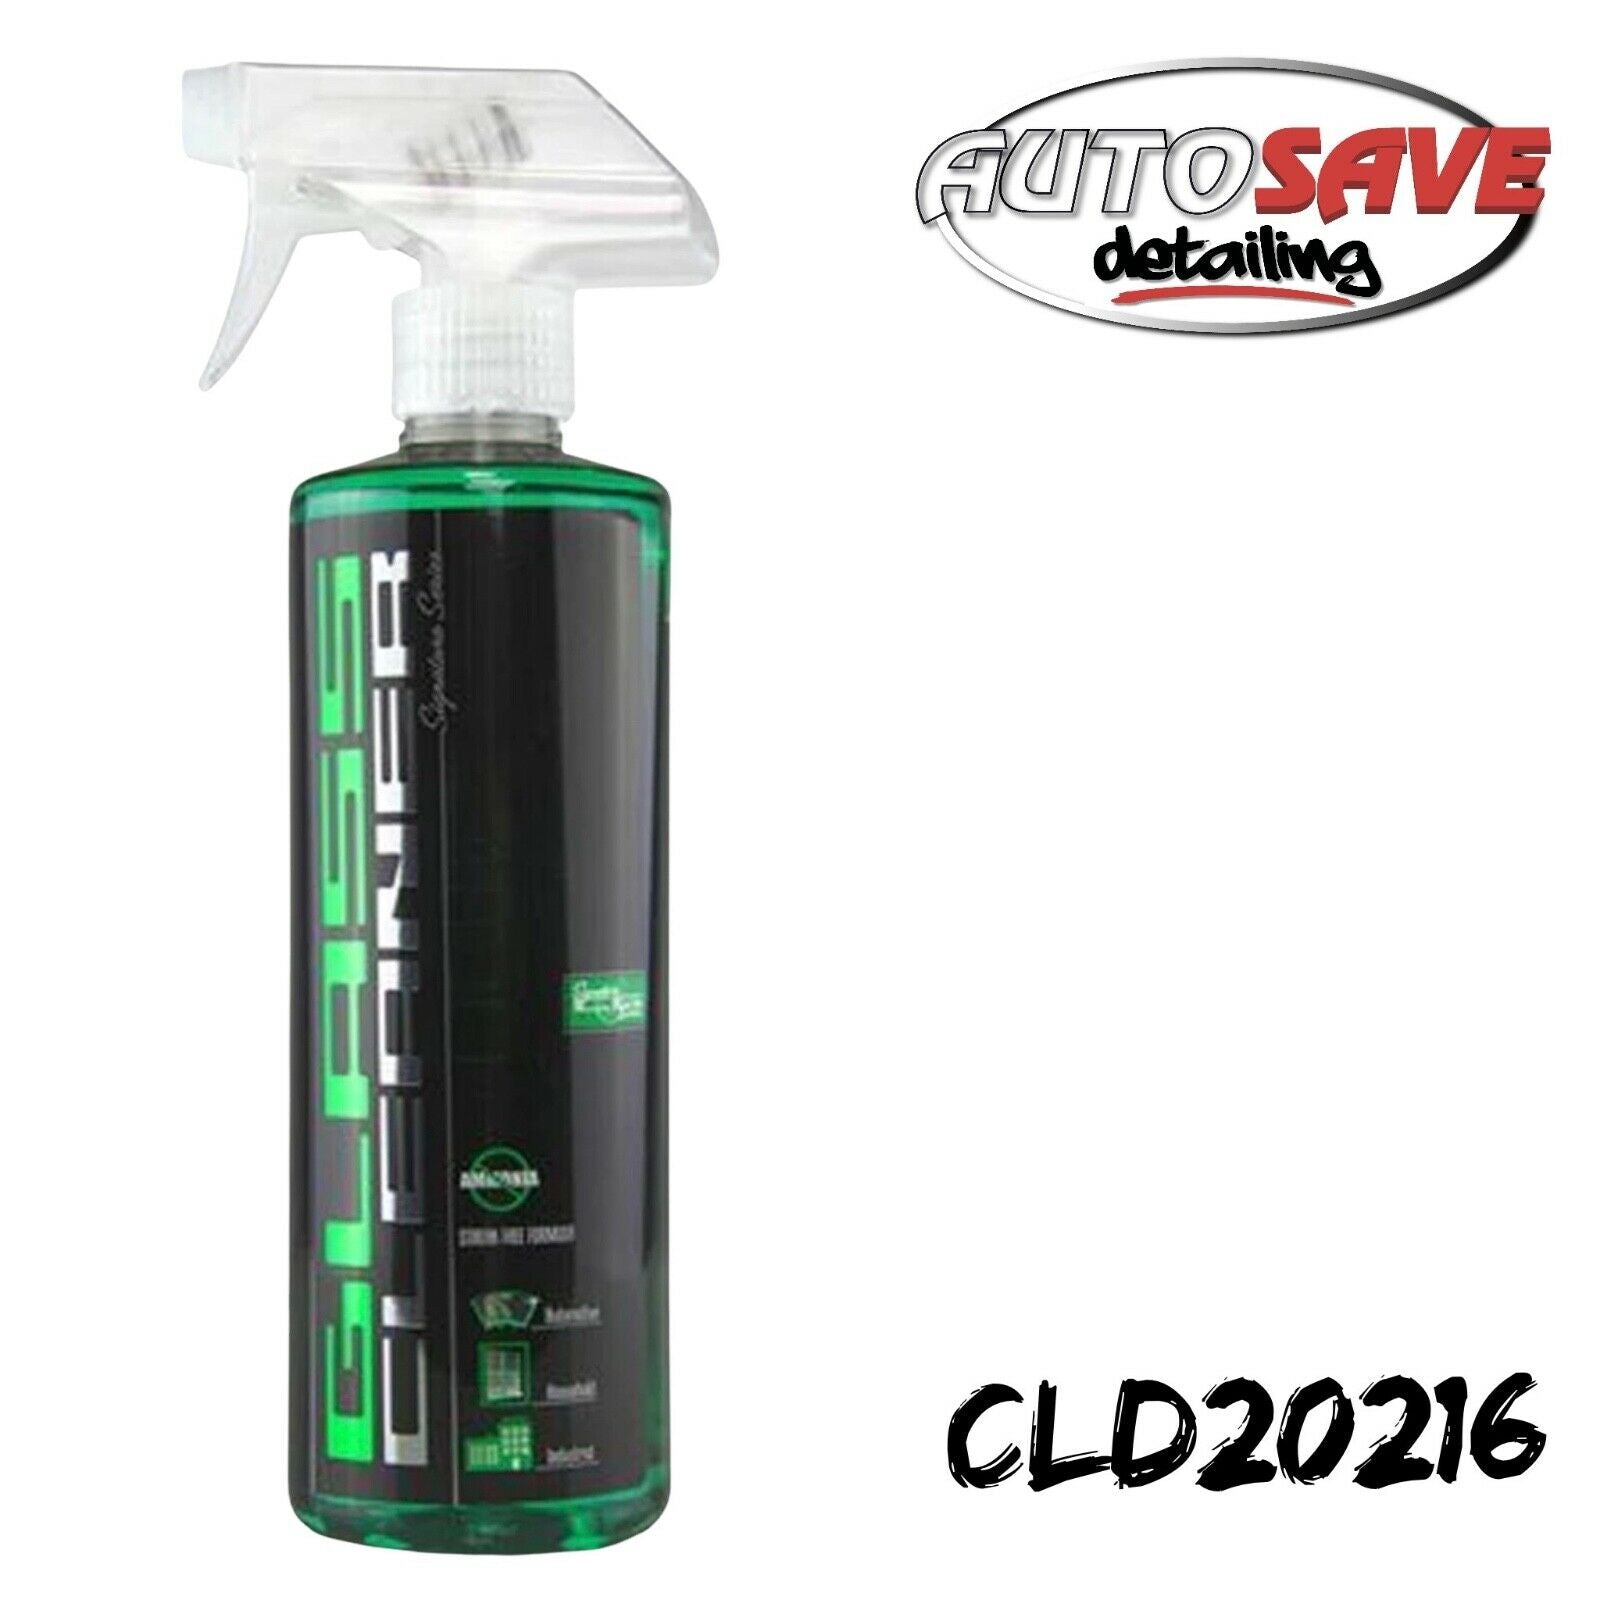 Chemical Guys - CLD20216 - Signature series Glass cleaner